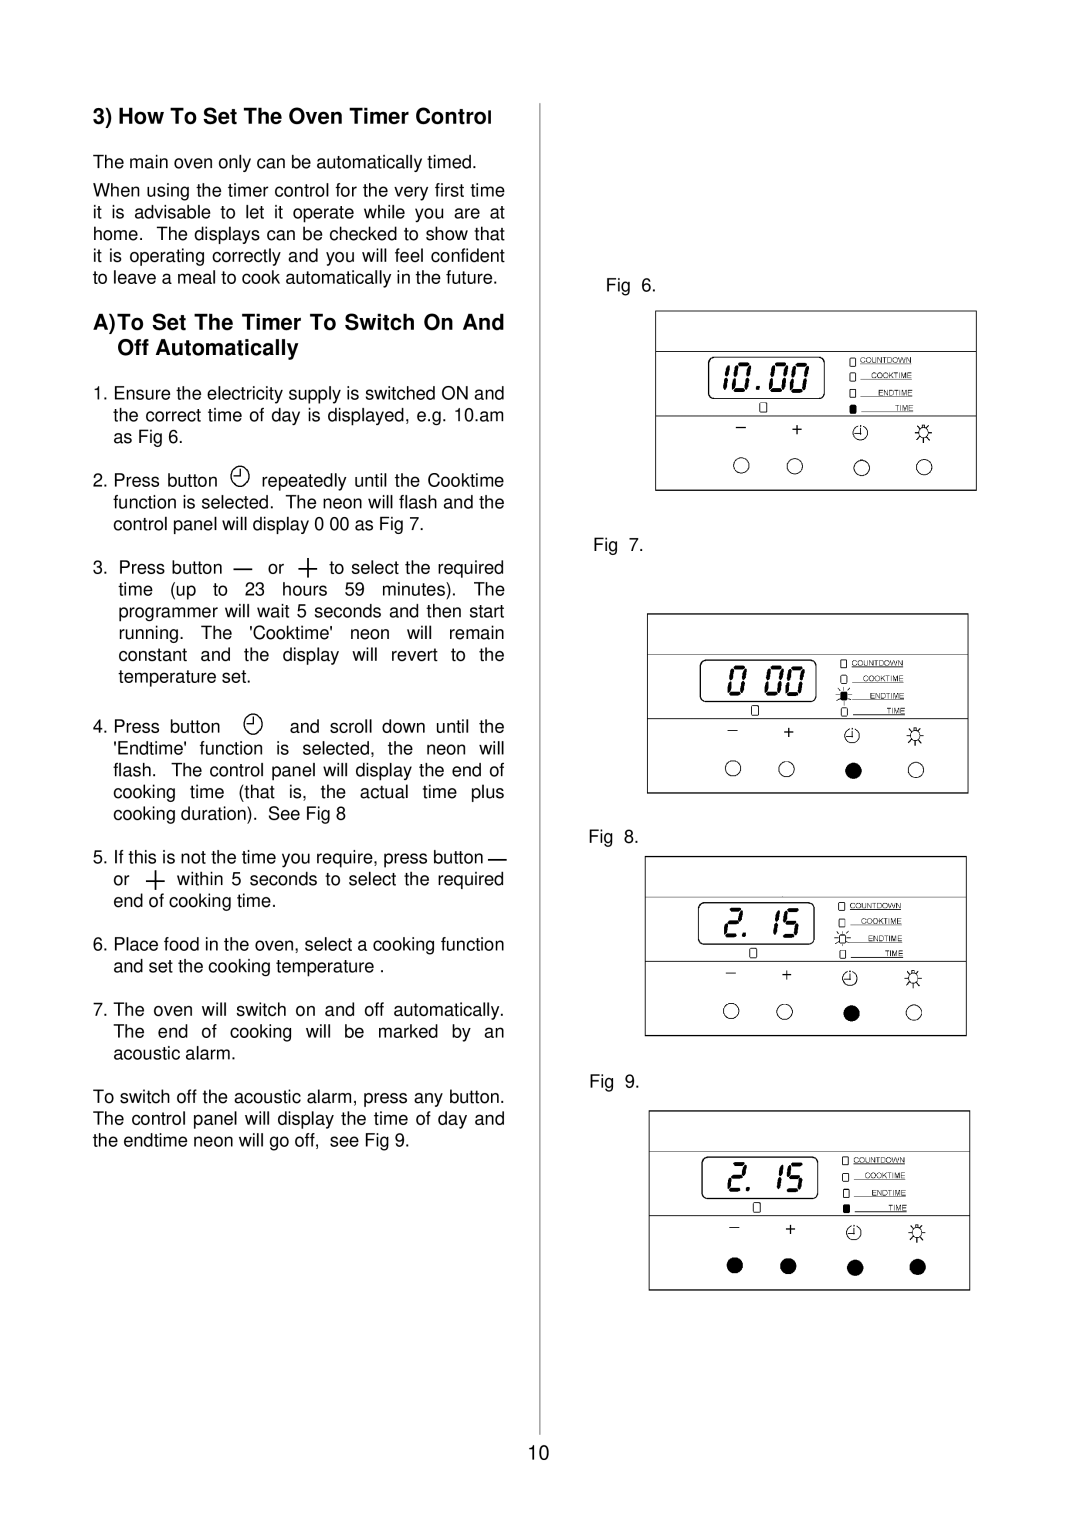 Electrolux D81000, D81005 installation instructions How To Set The Oven Timer Control 